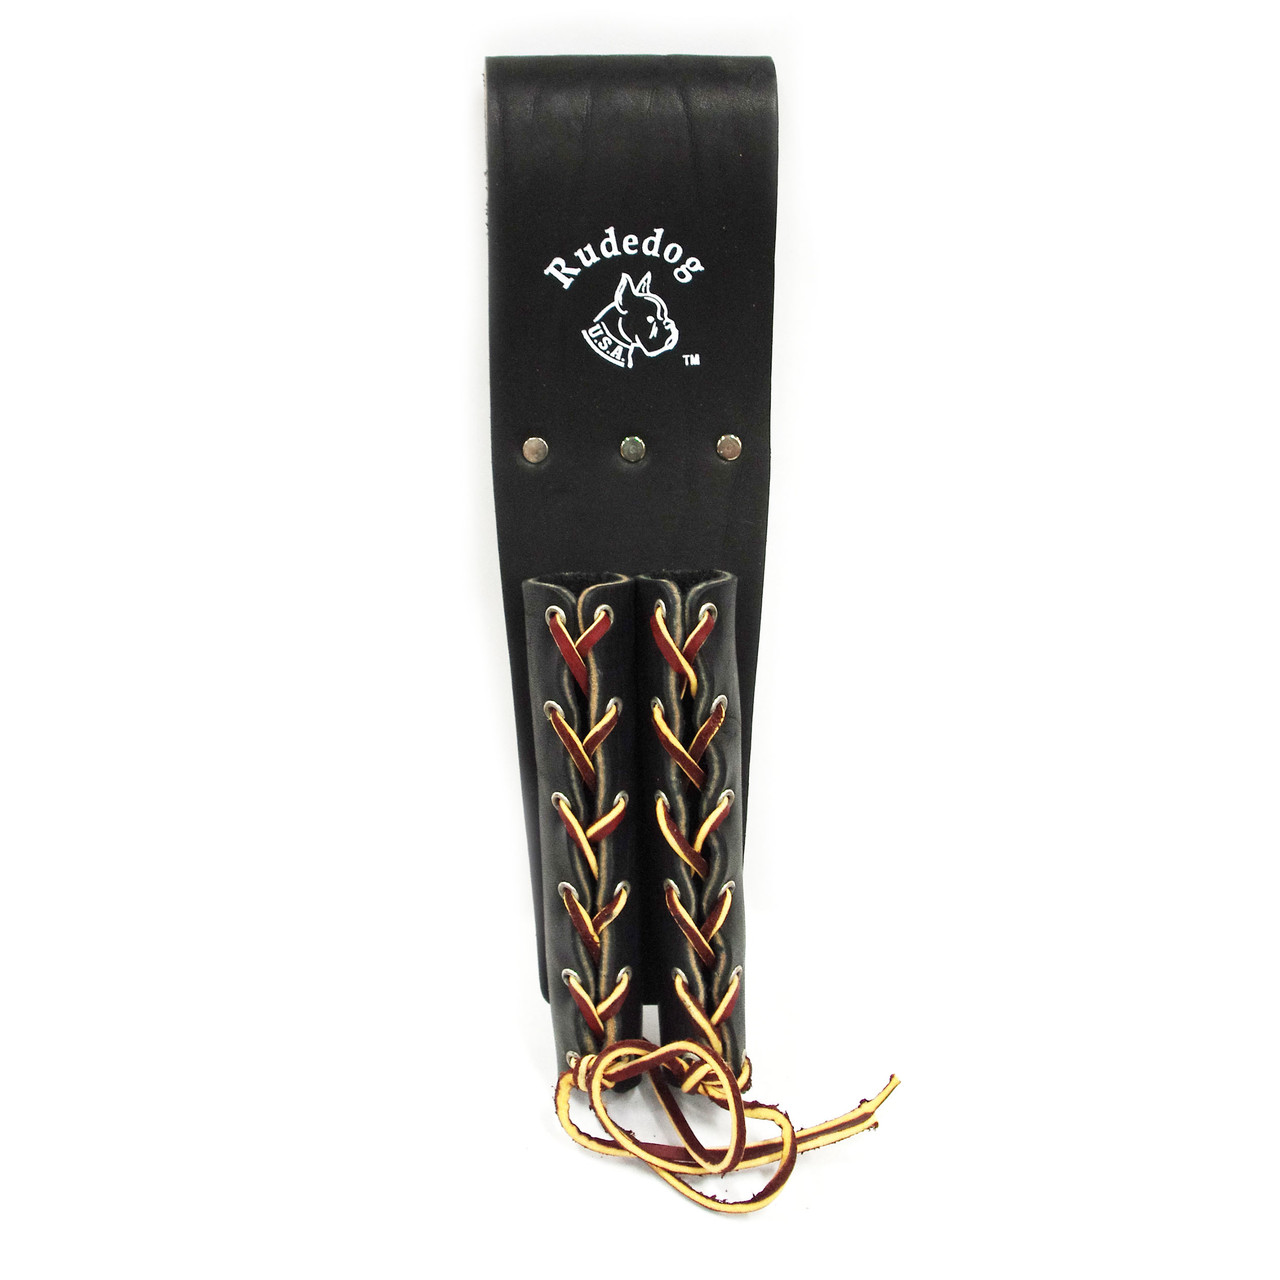 Rudedog Double Bull Pin Holder from GME Supply